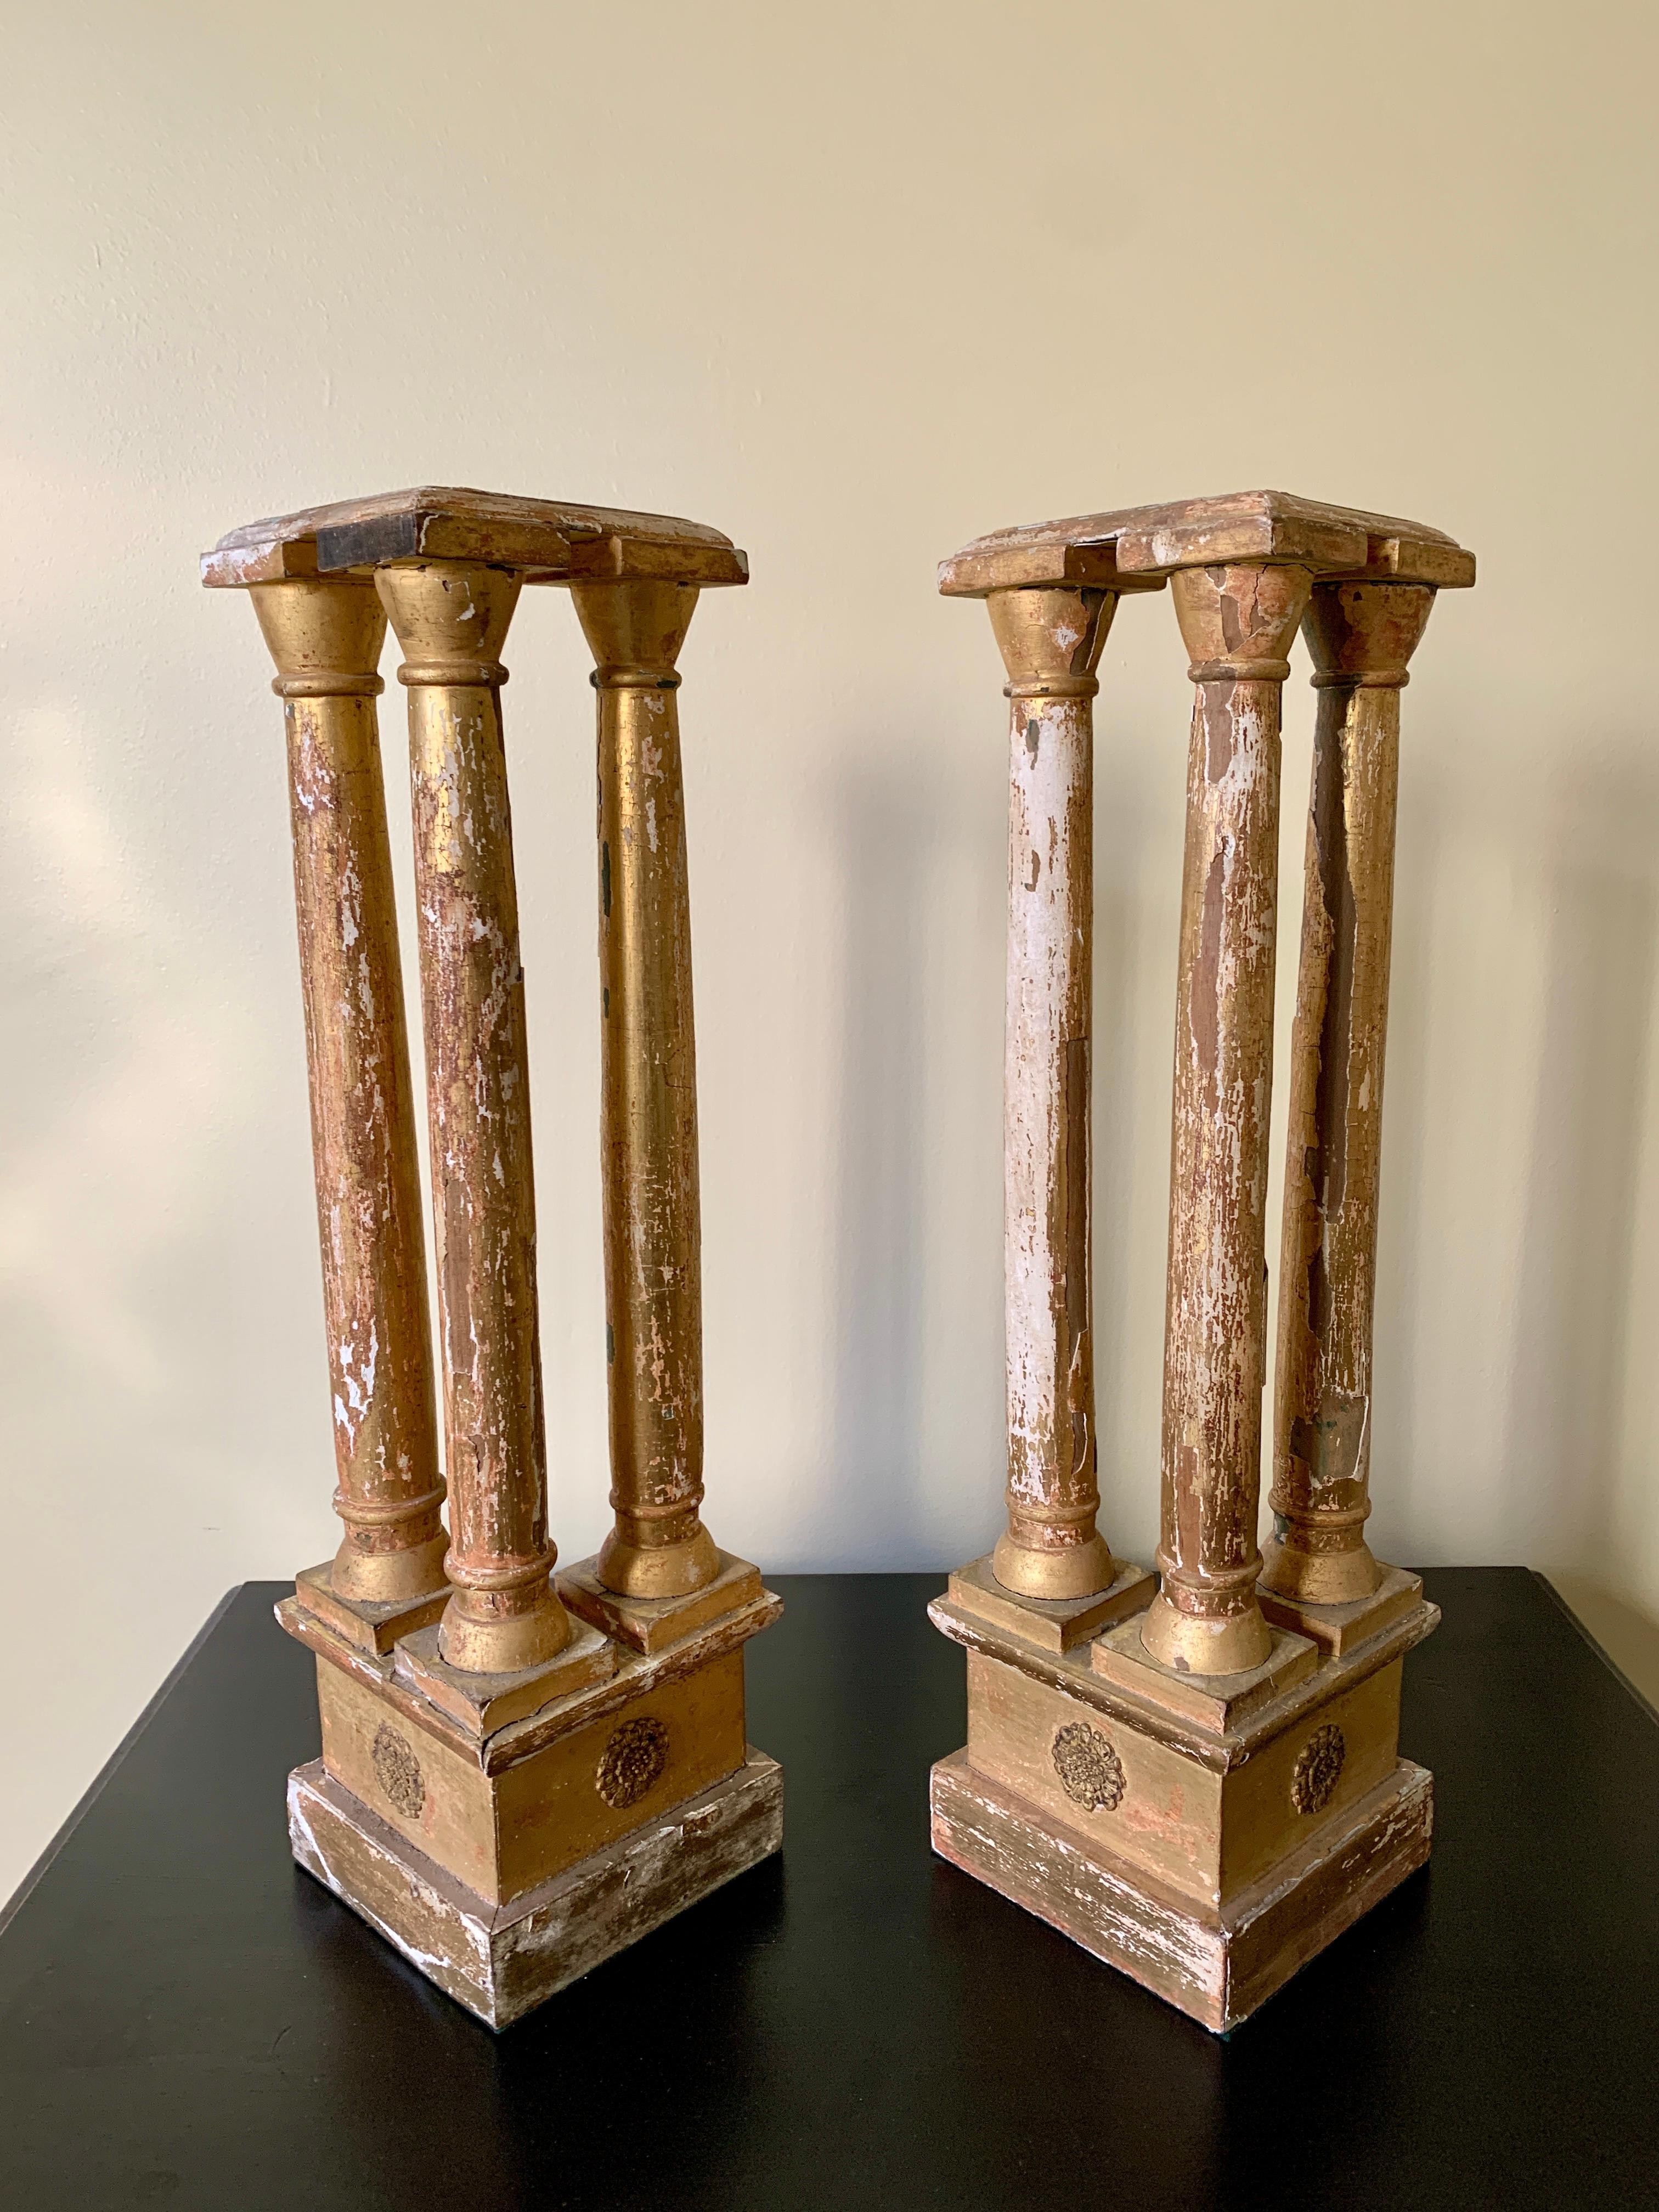 Antique Neoclassical Grand Tour Giltwood Architectural Columns, a Pair For Sale 4